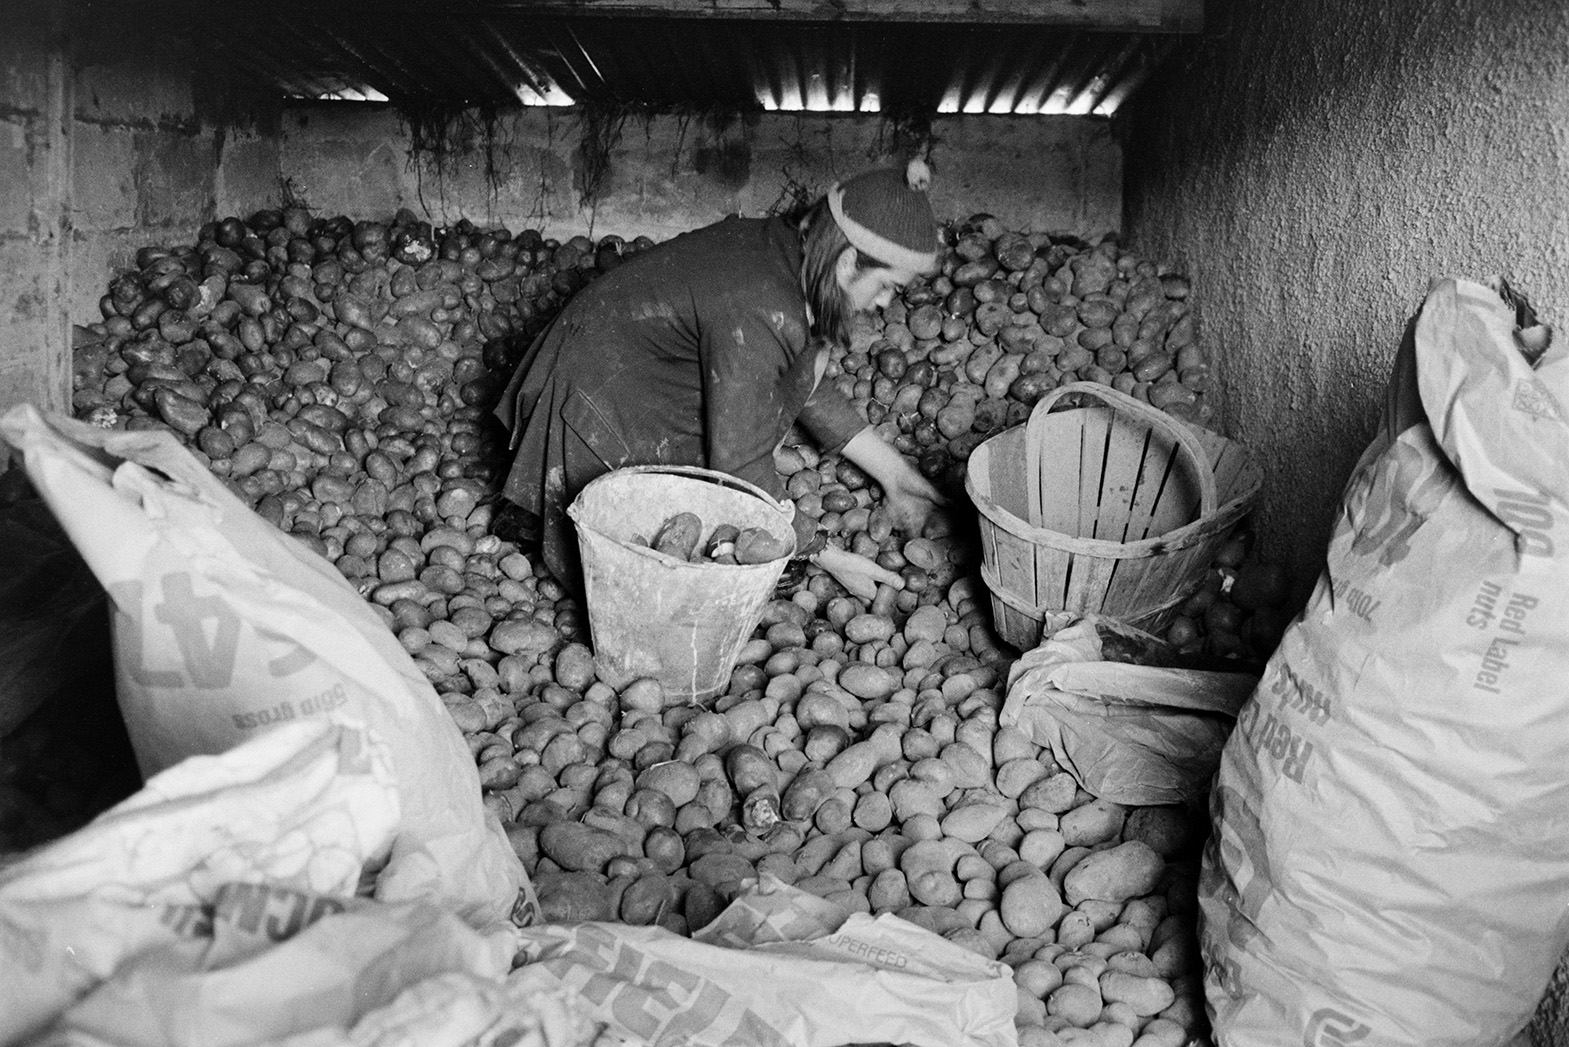 Derek Bright sorting potatoes in a shed at Mill Road Farm, Beaford, into those for selling, those for seed and those which are rotten. He is sorting them into a bucket and a trug. Sacks are visible in the foreground. The farm was also known as Jeffrys.